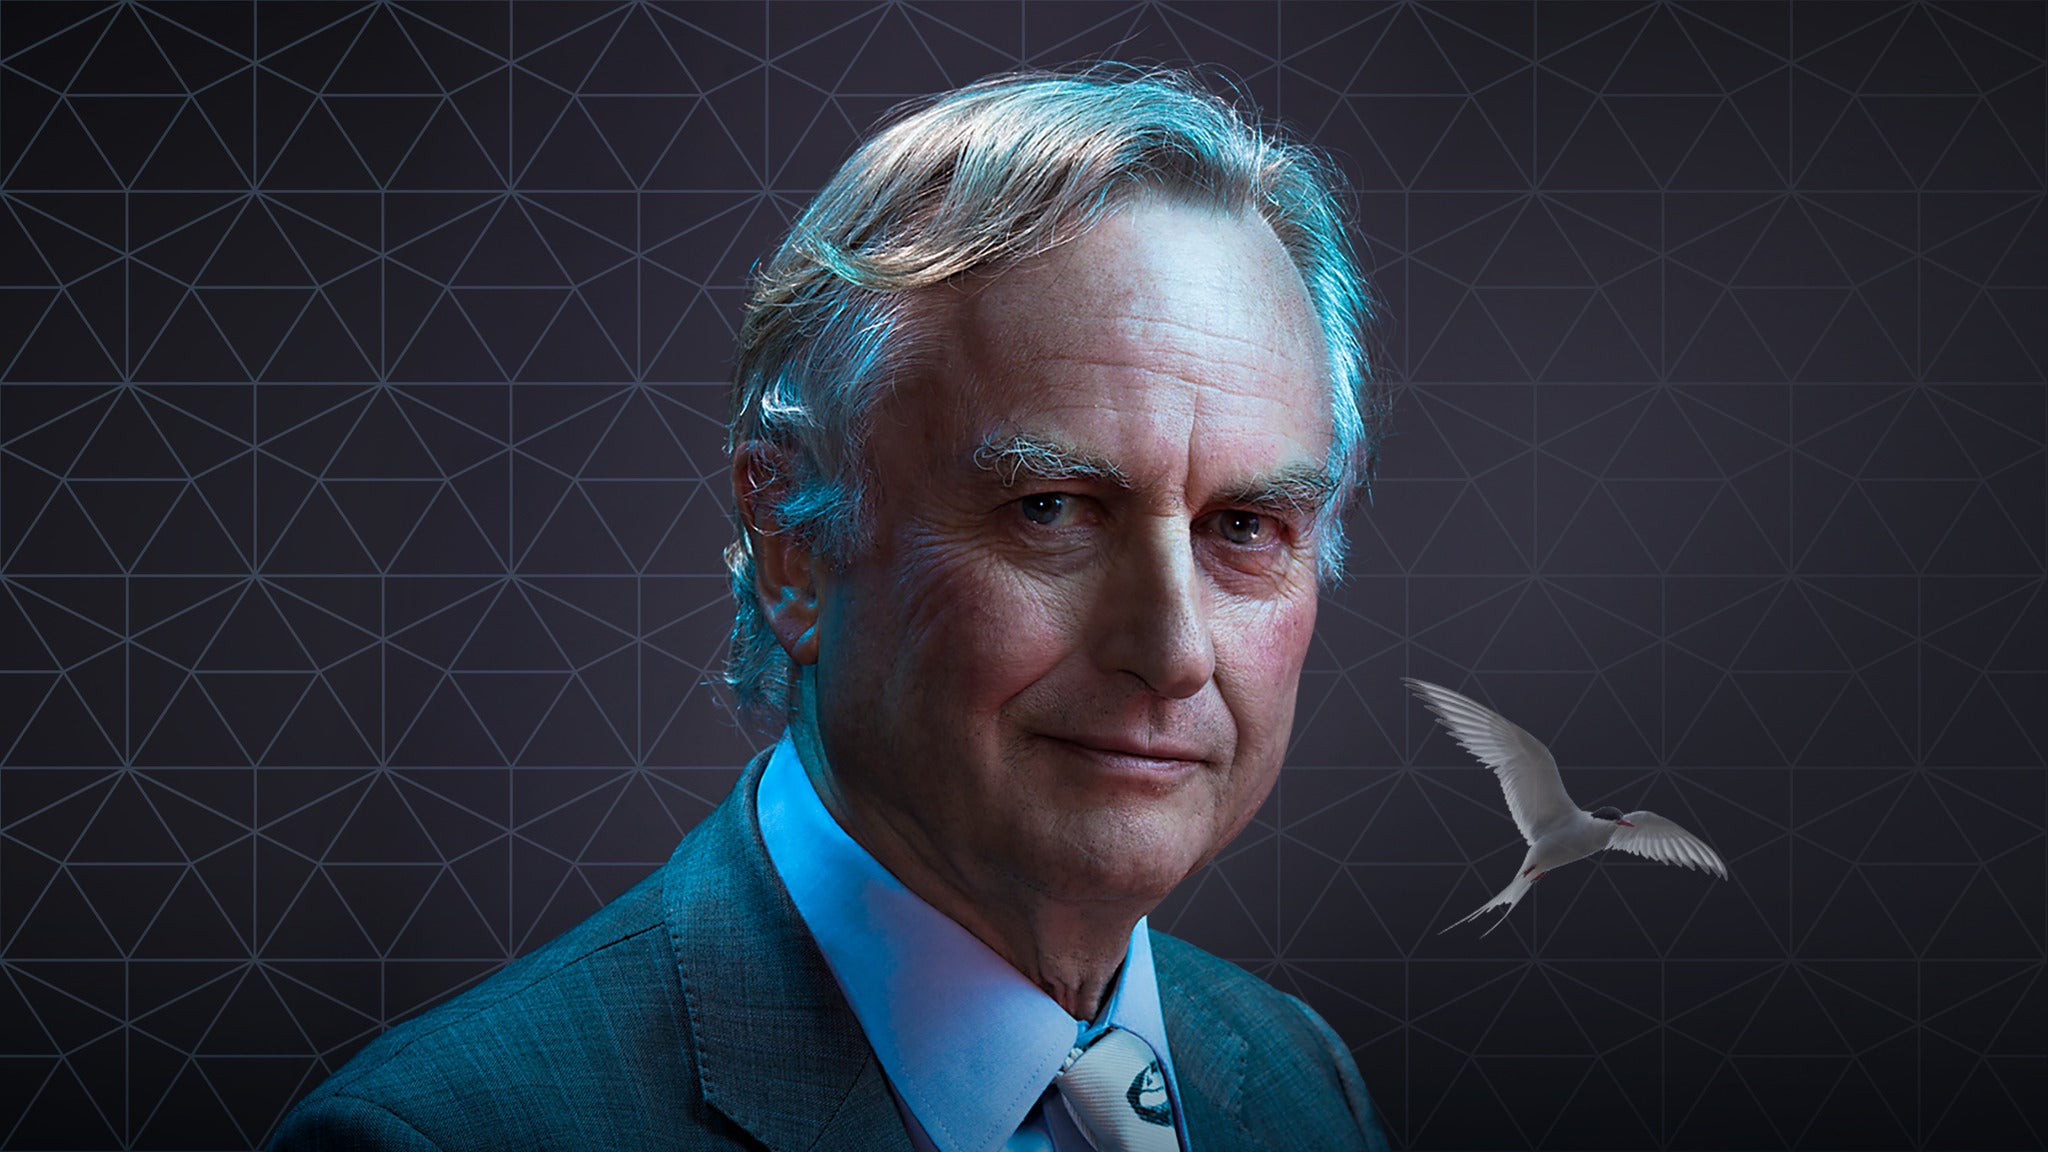 Image used with permission from Ticketmaster | Richard Dawkins tickets